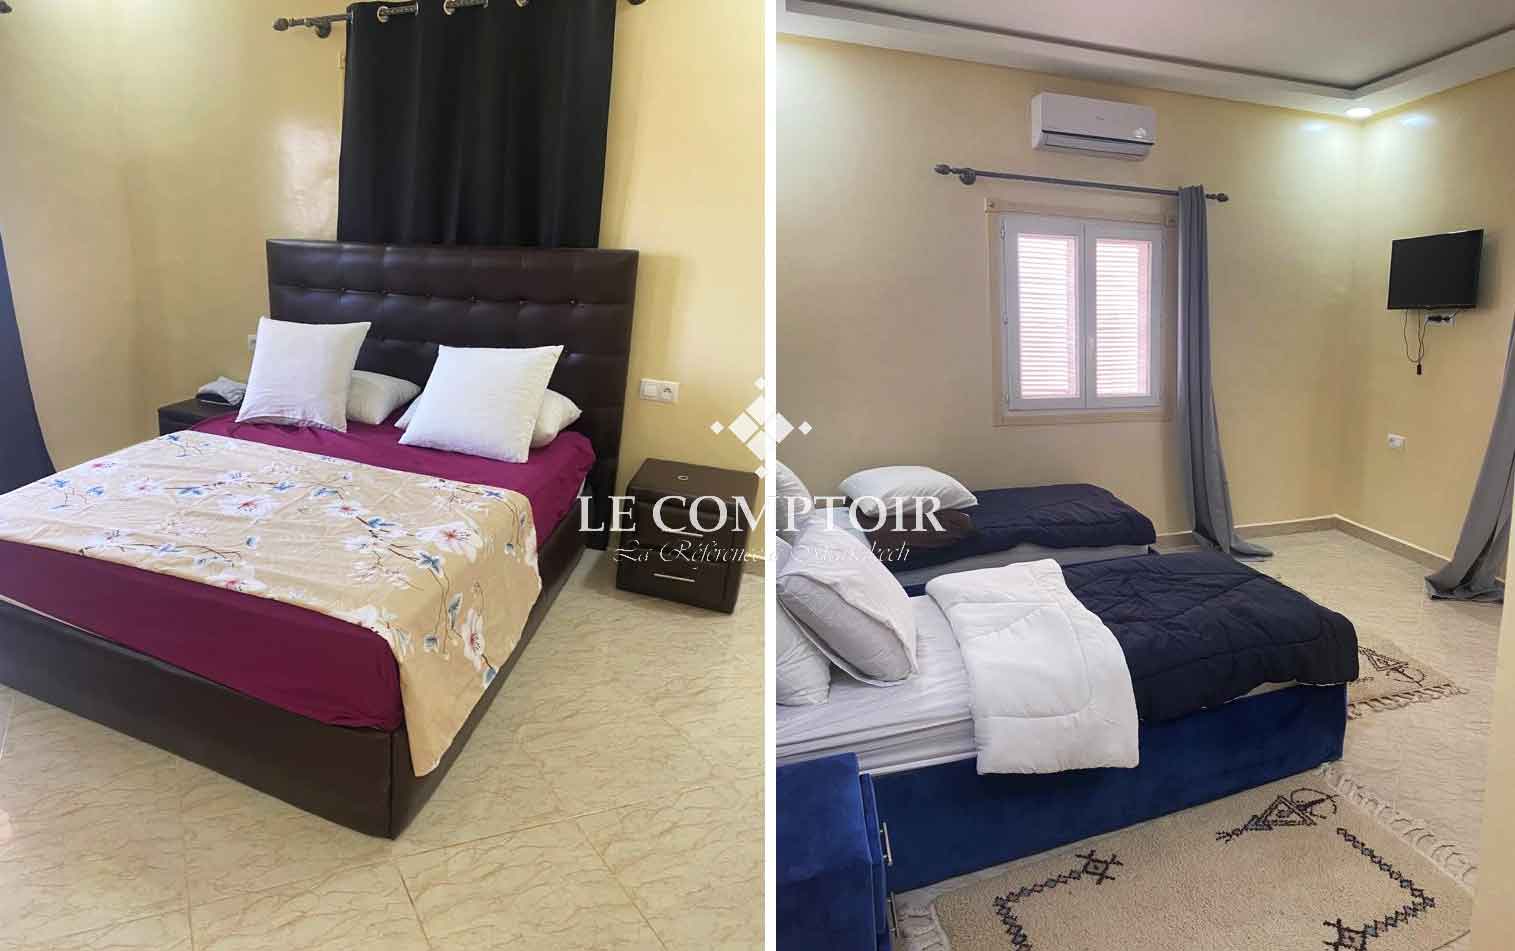 Le Comptoir Immobilier Agence Immobiliere Marrakech Maison Chouiter Individuelle Chouiter Marrakech Privatif Piscine Jardin Vente Villa Agence Immobilier Immobiliere Real State 6